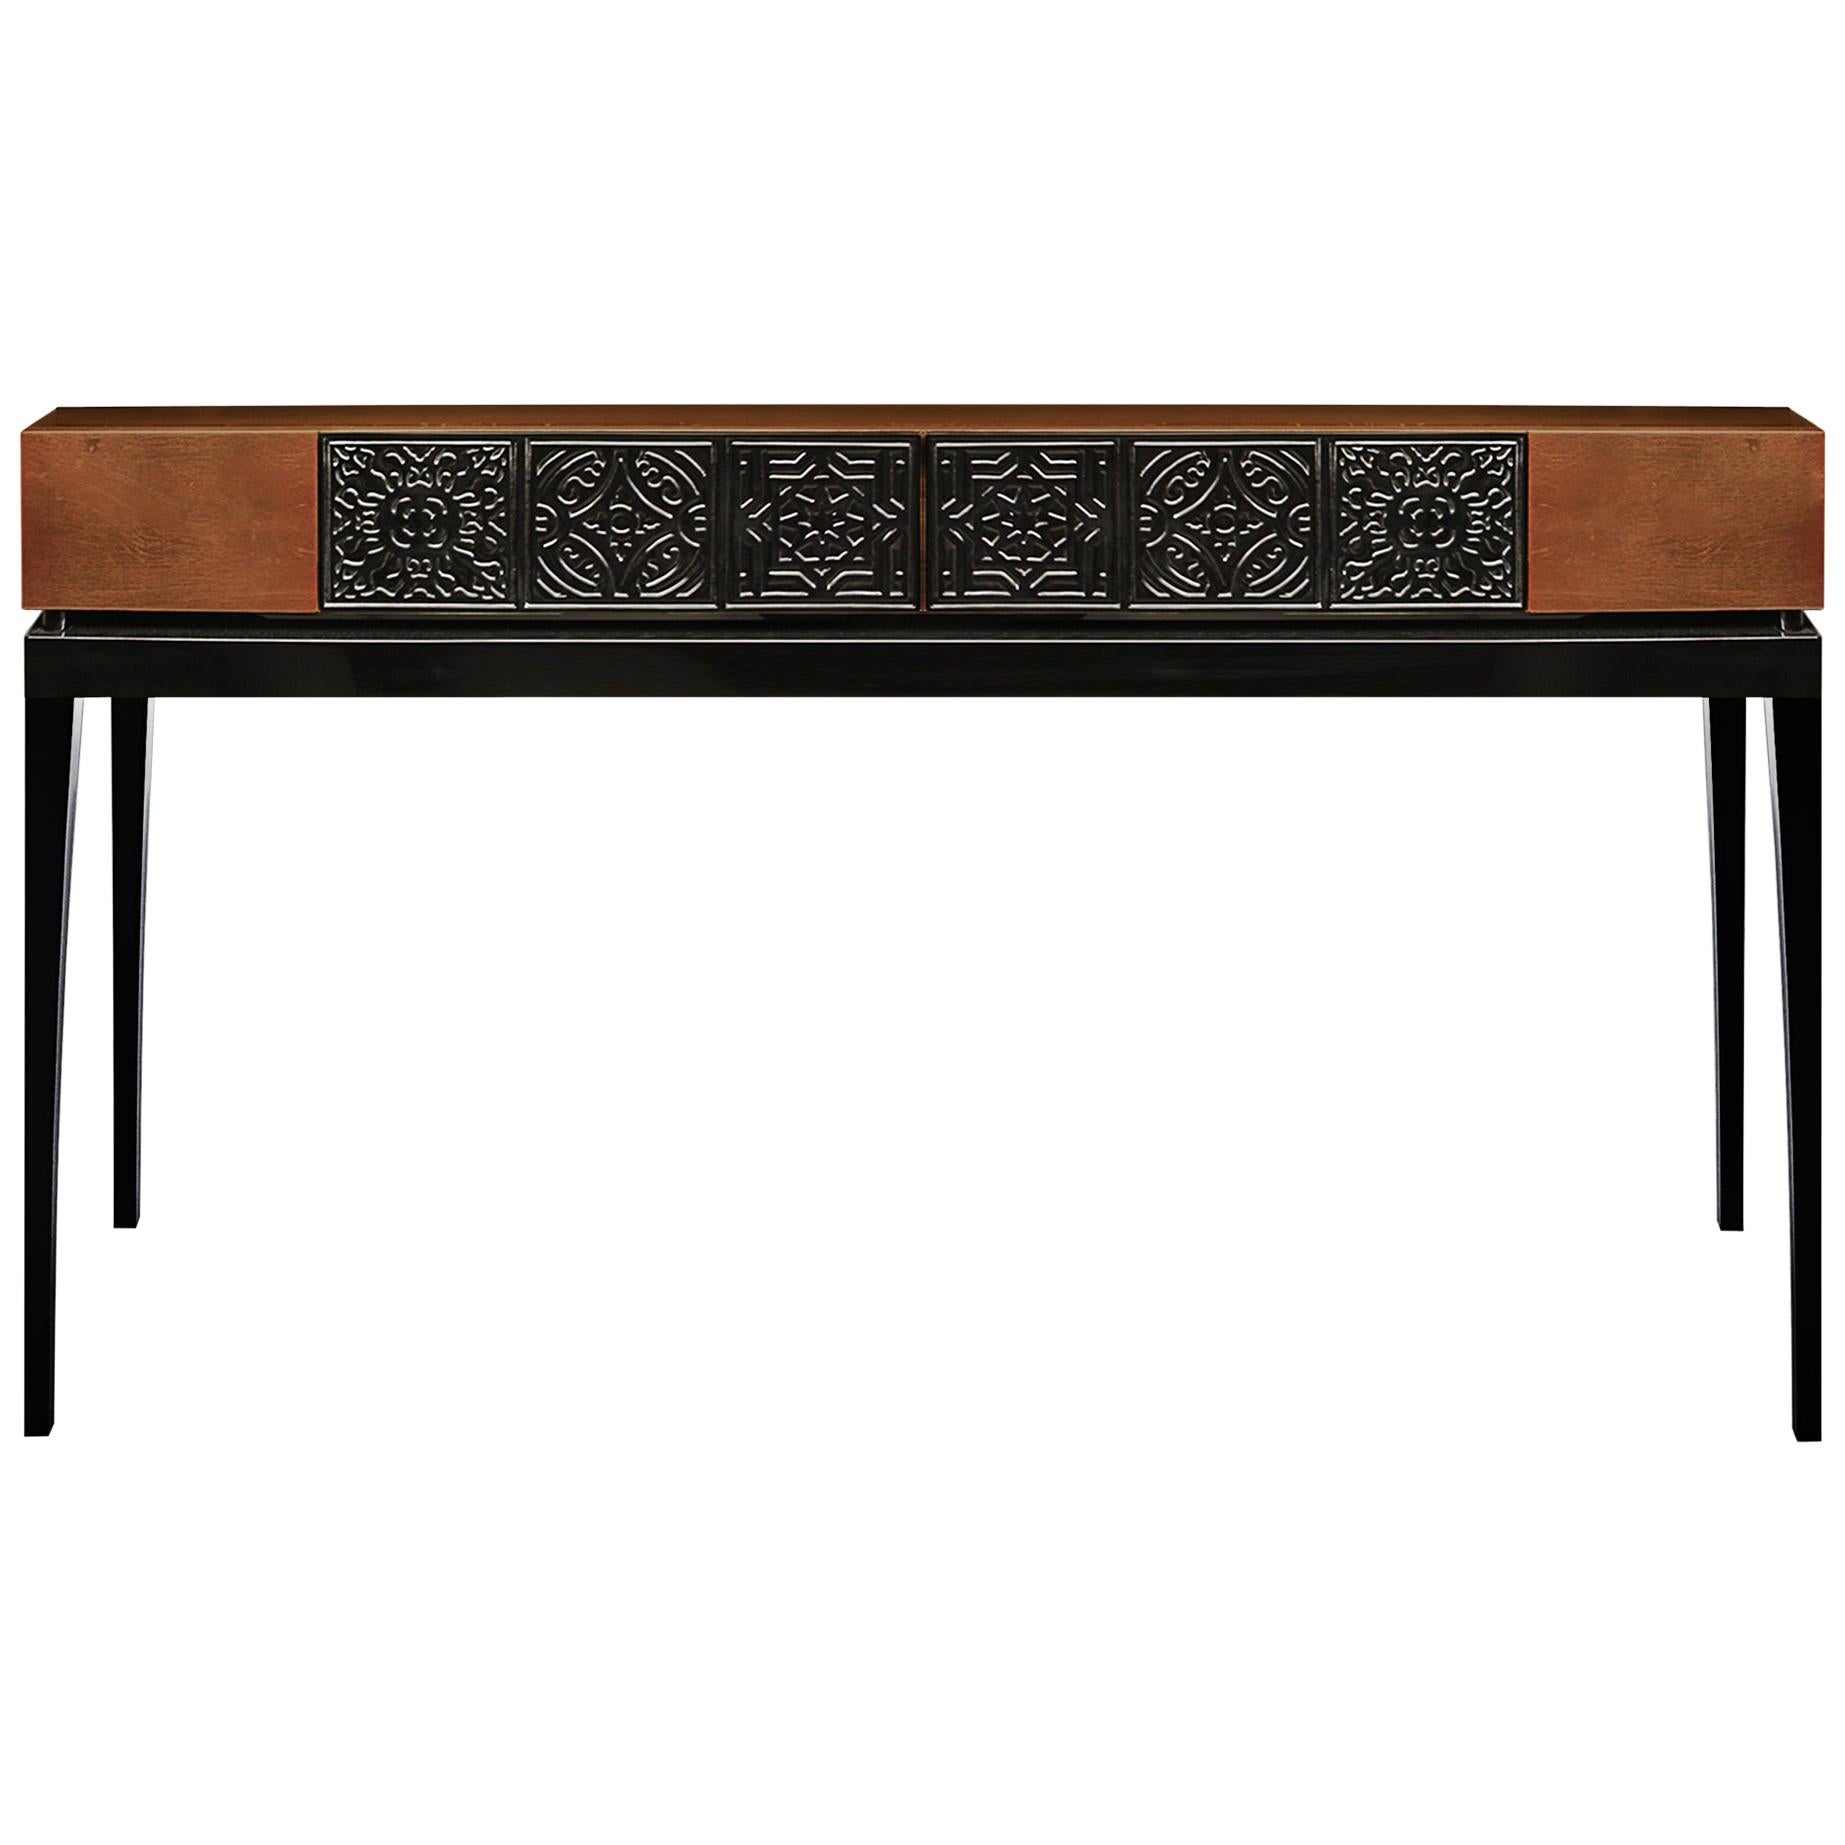 21st Century Virtuoso II Console Wooden Carved Tiles For Sale